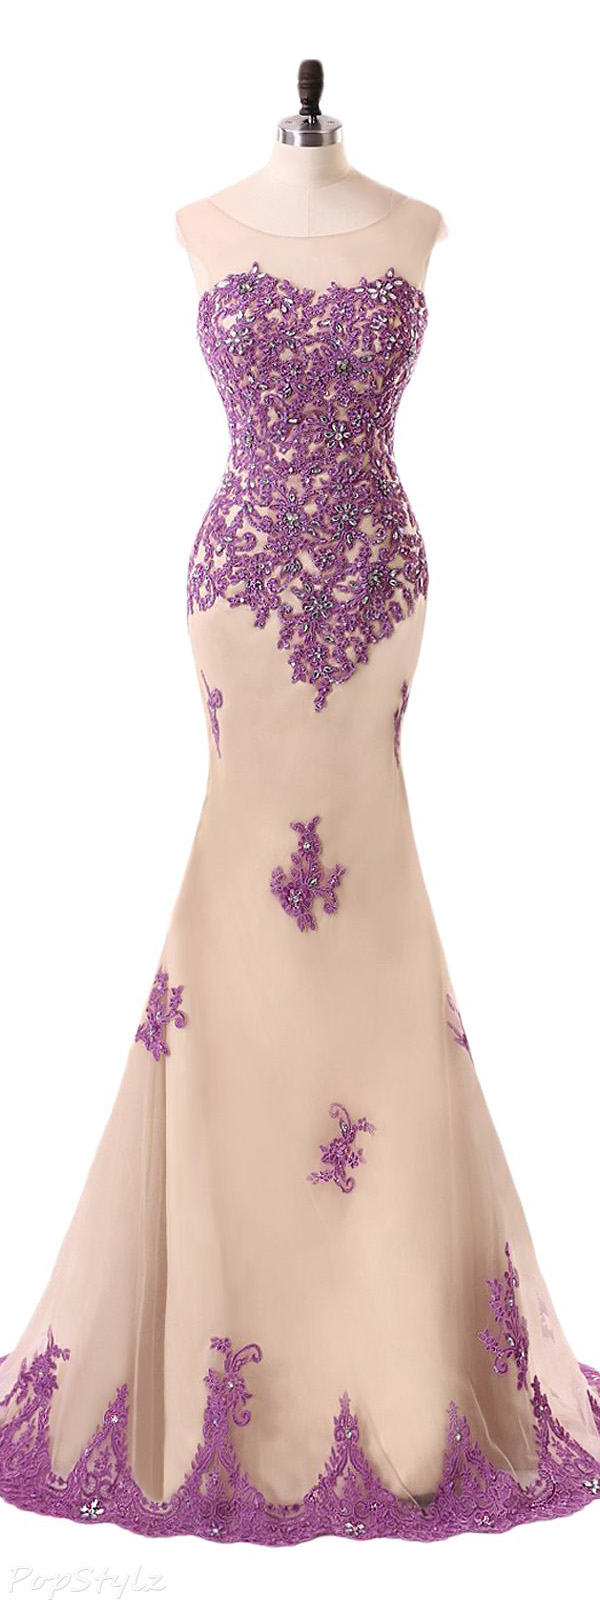 Sunvary Champagne & Purple Lace Mermaid Gown